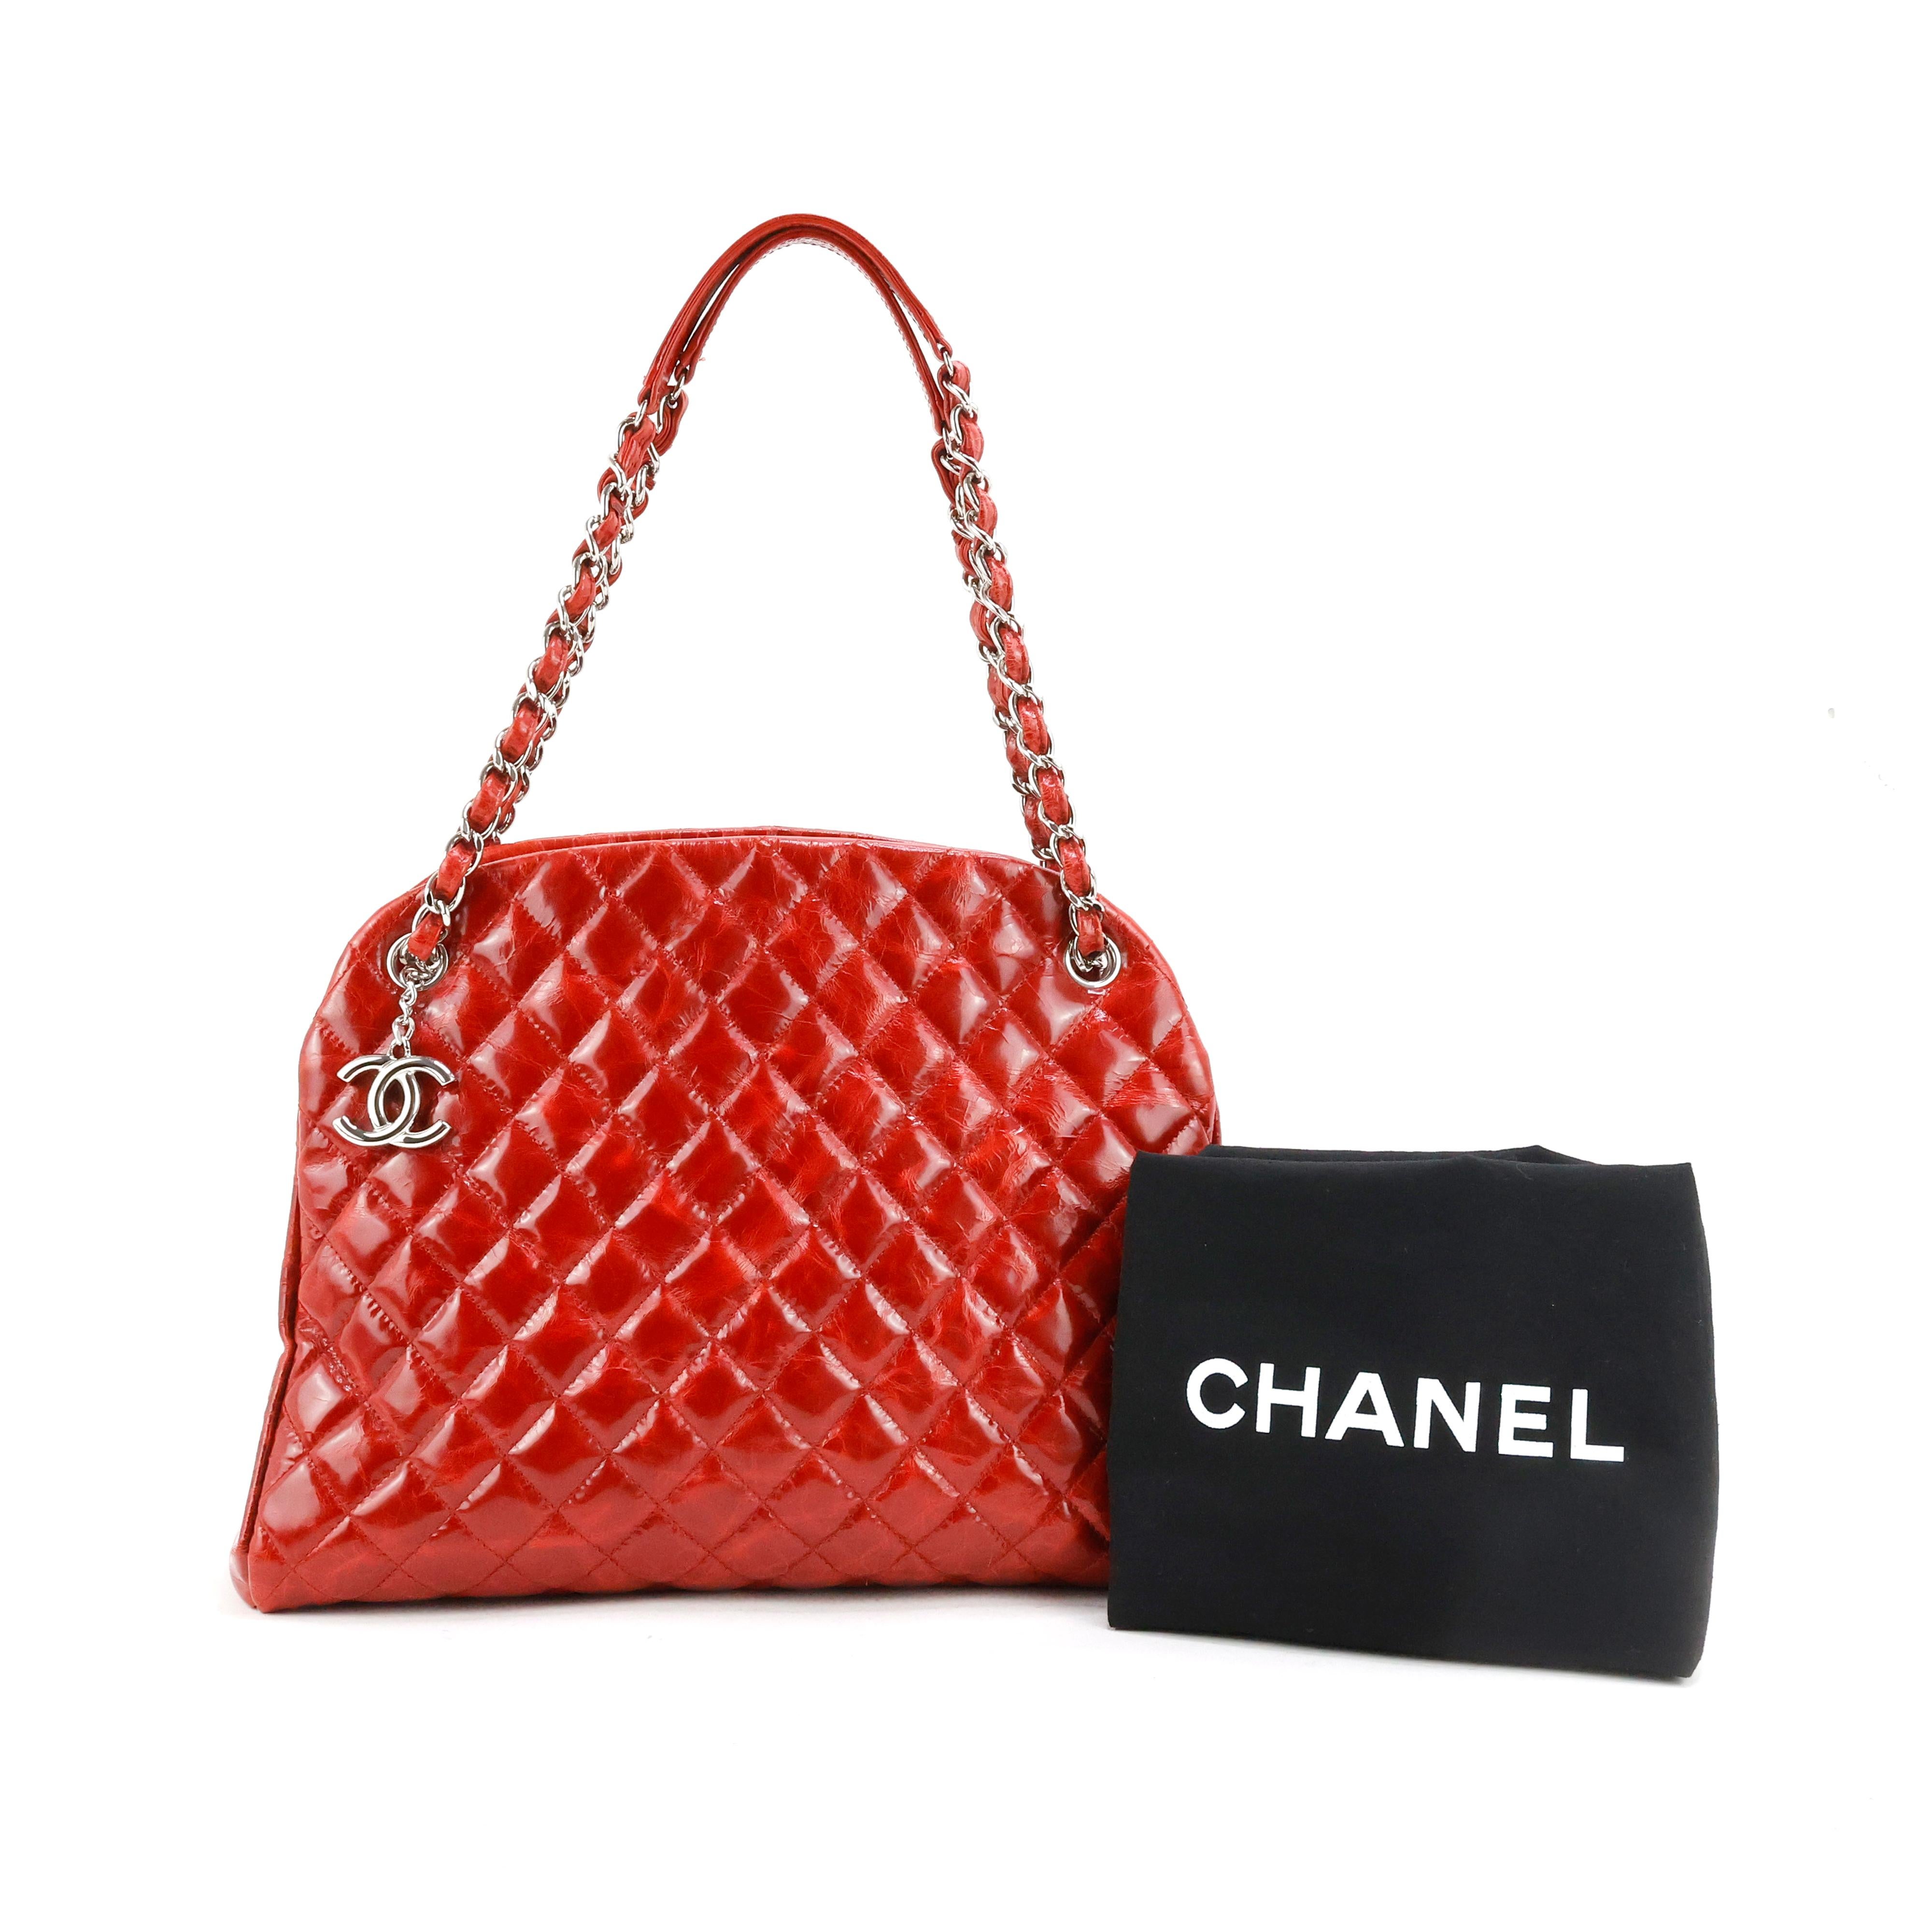 Chanel Bag in red quilted leather In Excellent Condition For Sale In Bressanone, IT